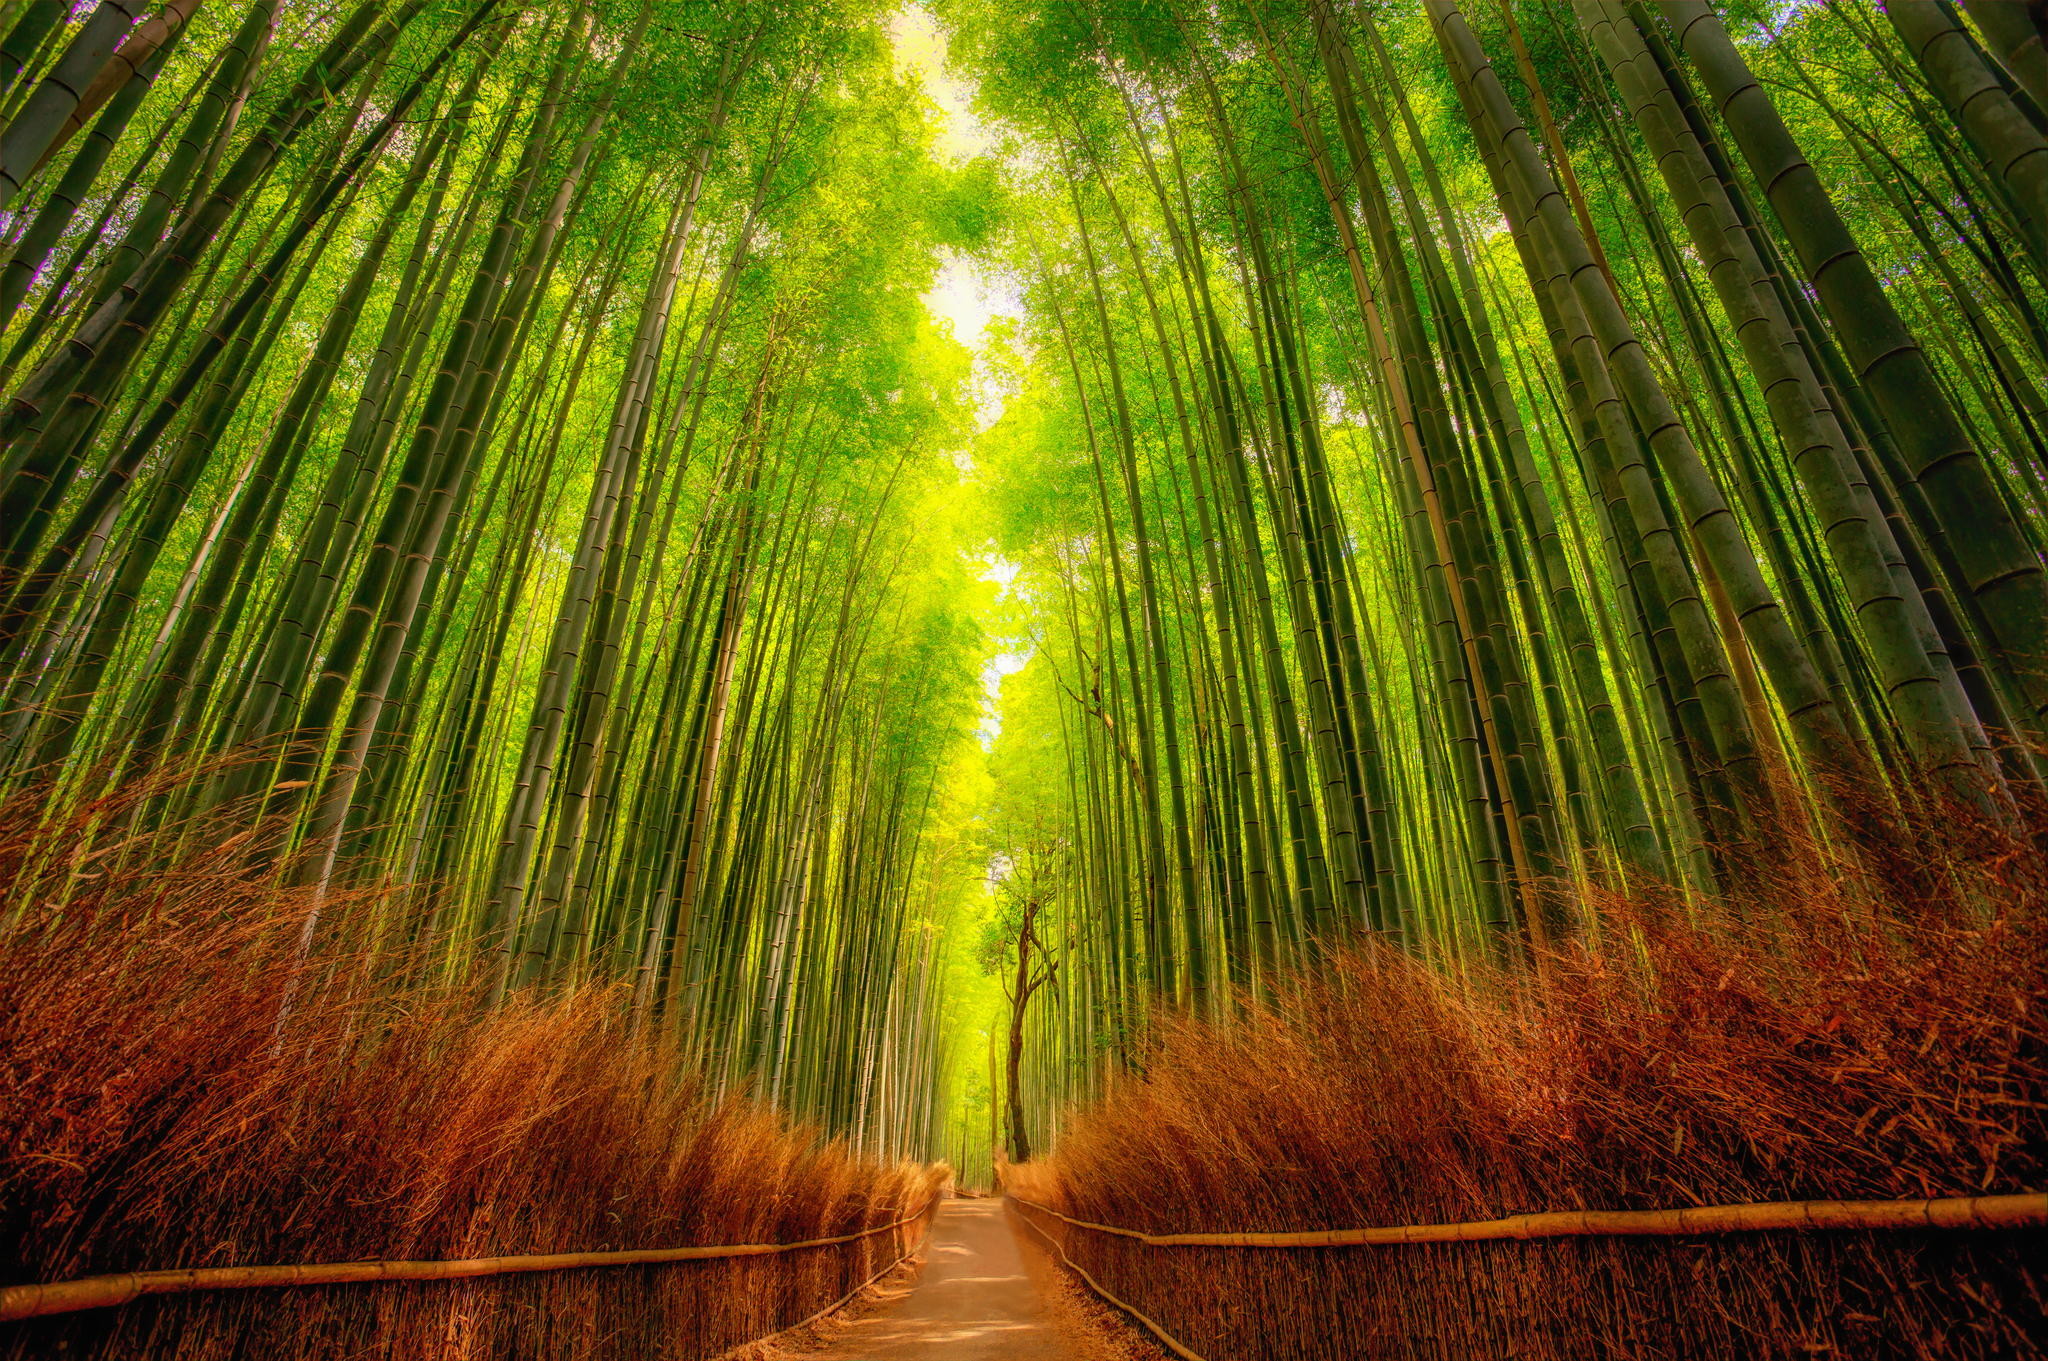 2048x1361 Bamboo forest by Rolf Hartbrich